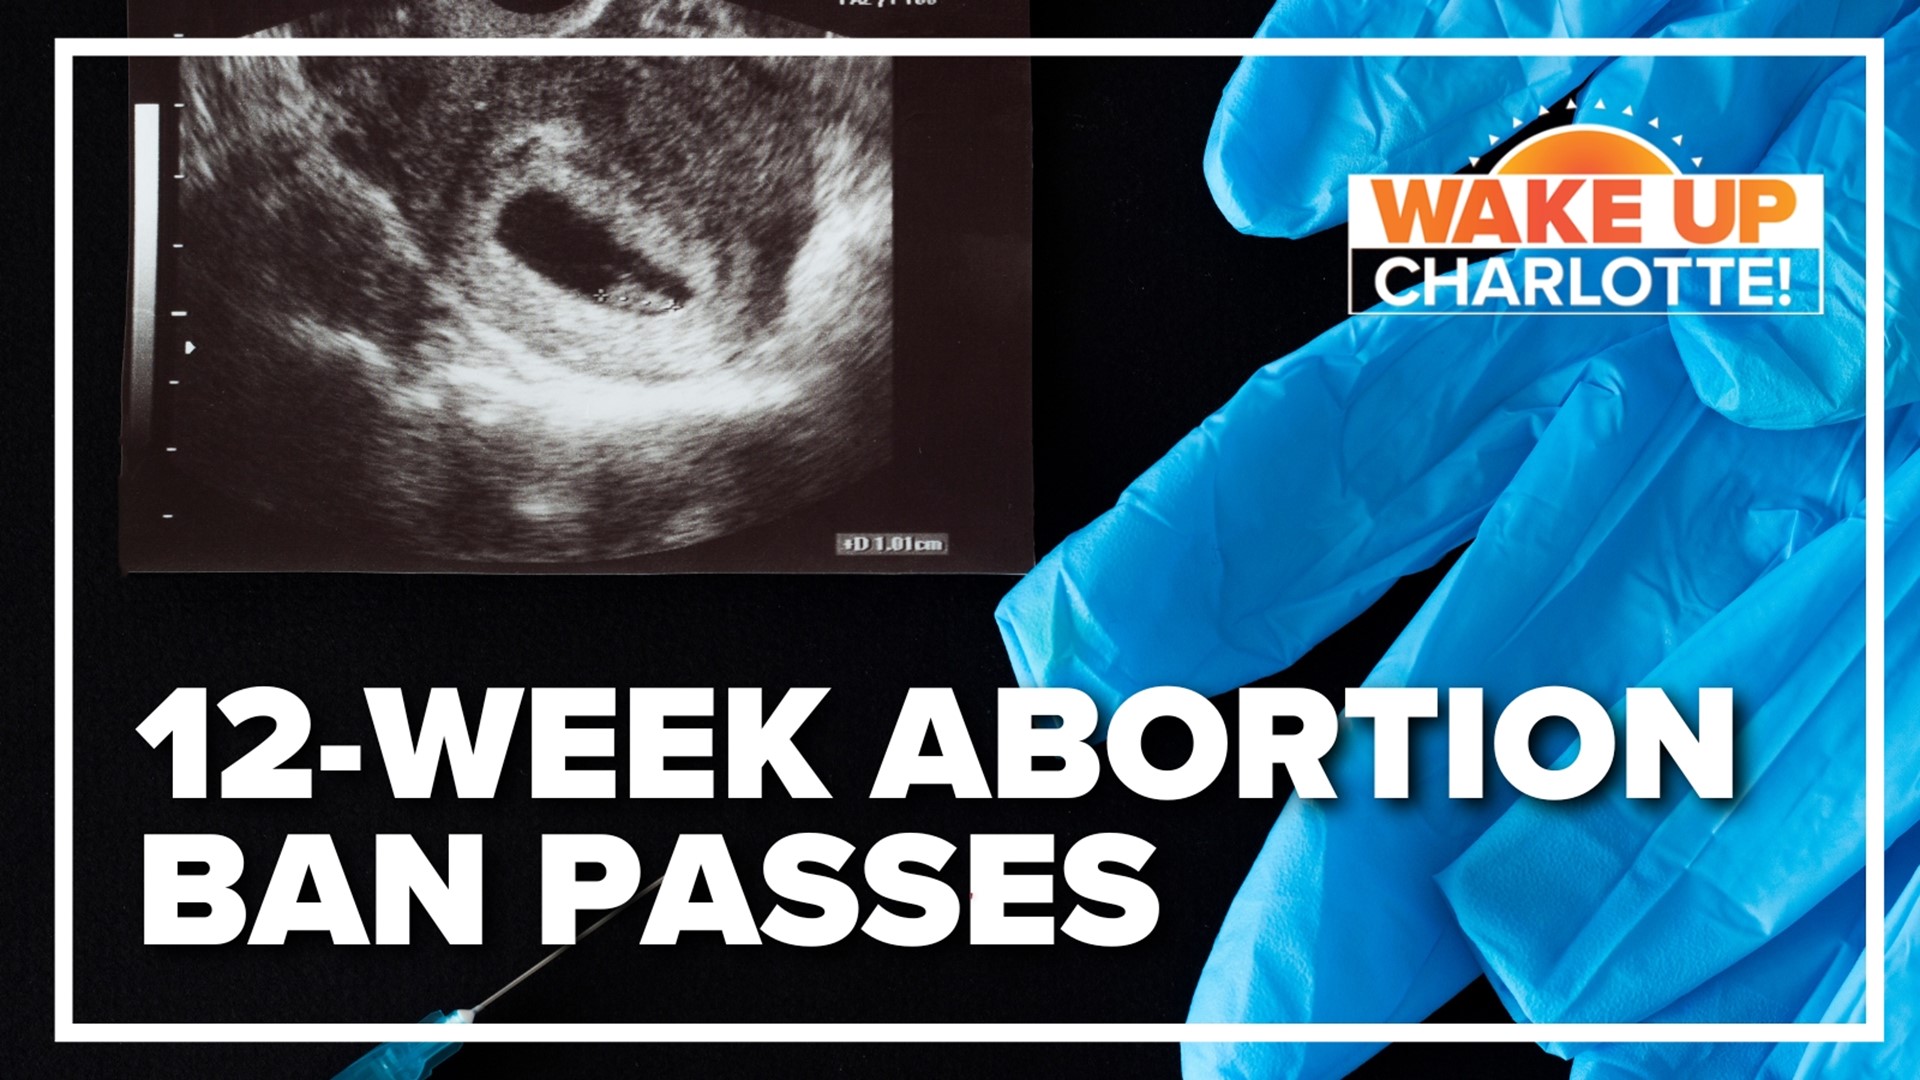 The three-fifths majority vote means a 12-week abortion ban is set to become law.